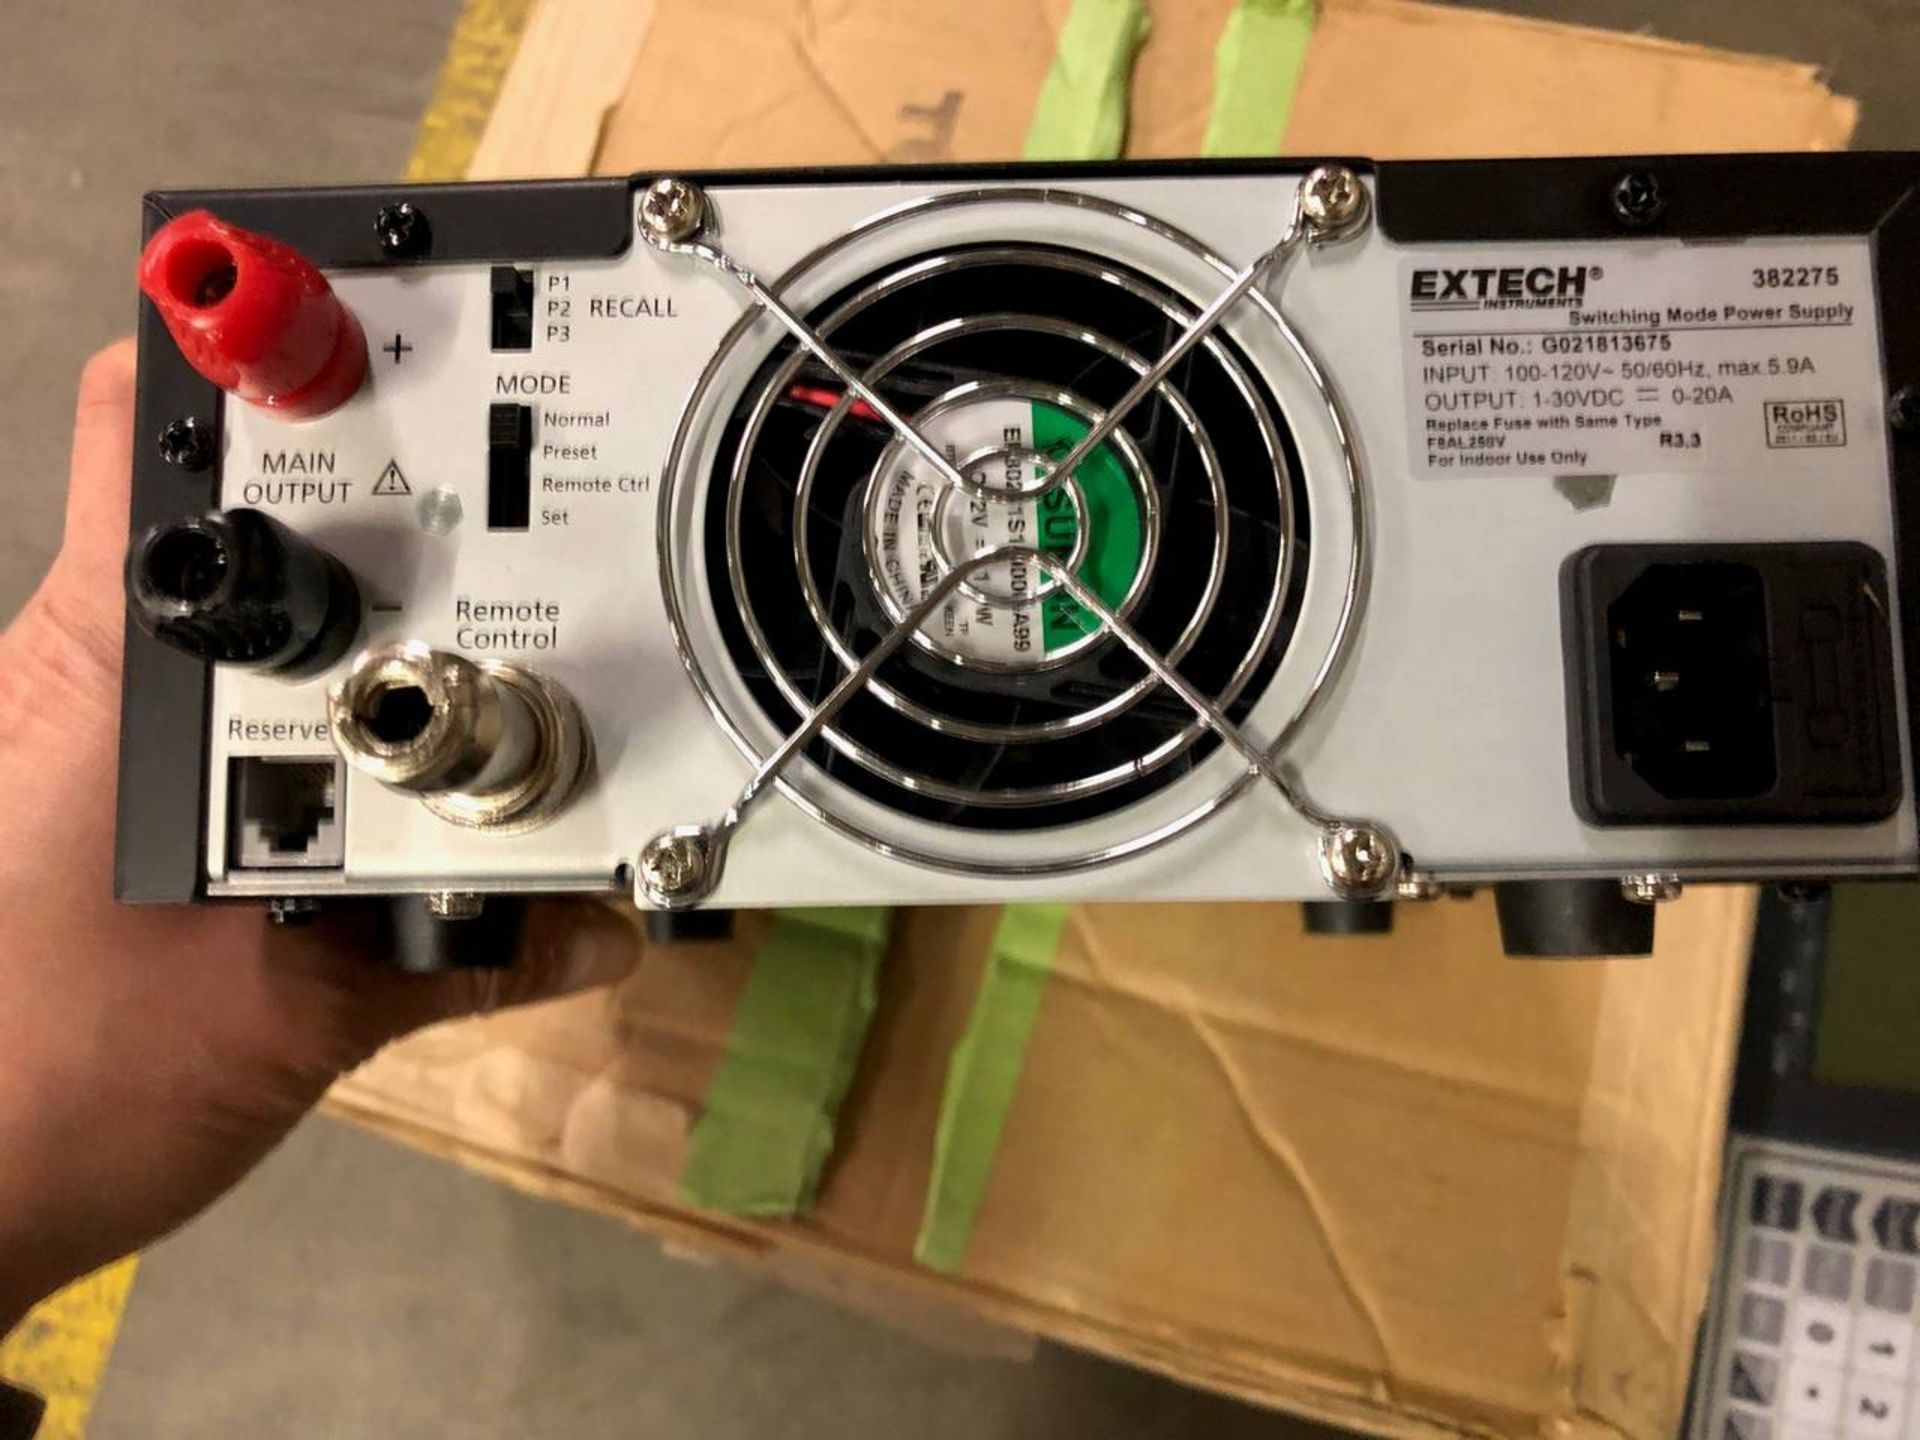 Extech 382275 Switching Mode Power Supply - Image 2 of 3